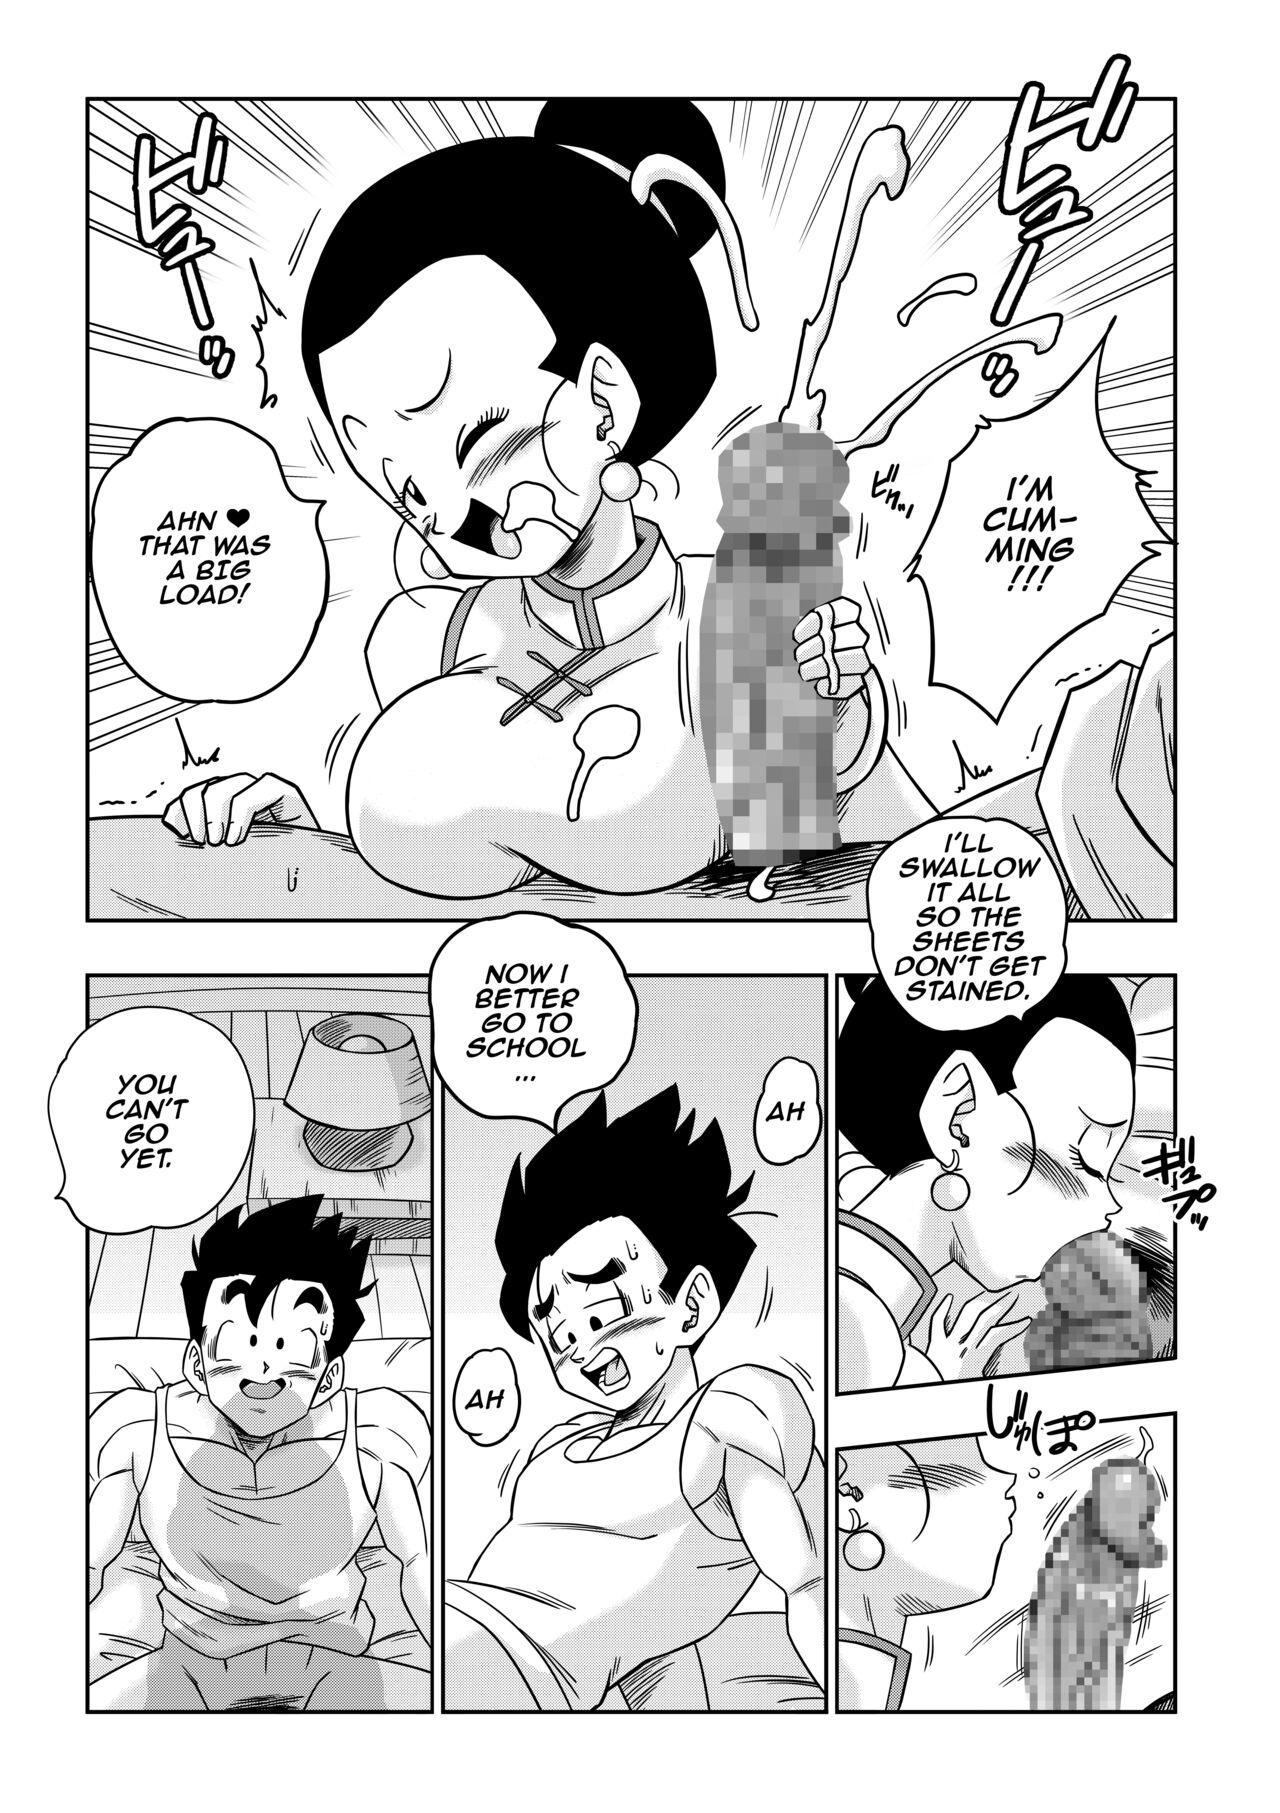 Girl LOVE TRIANGLE Z PART 5 - Dragon ball z Oiled - Page 7